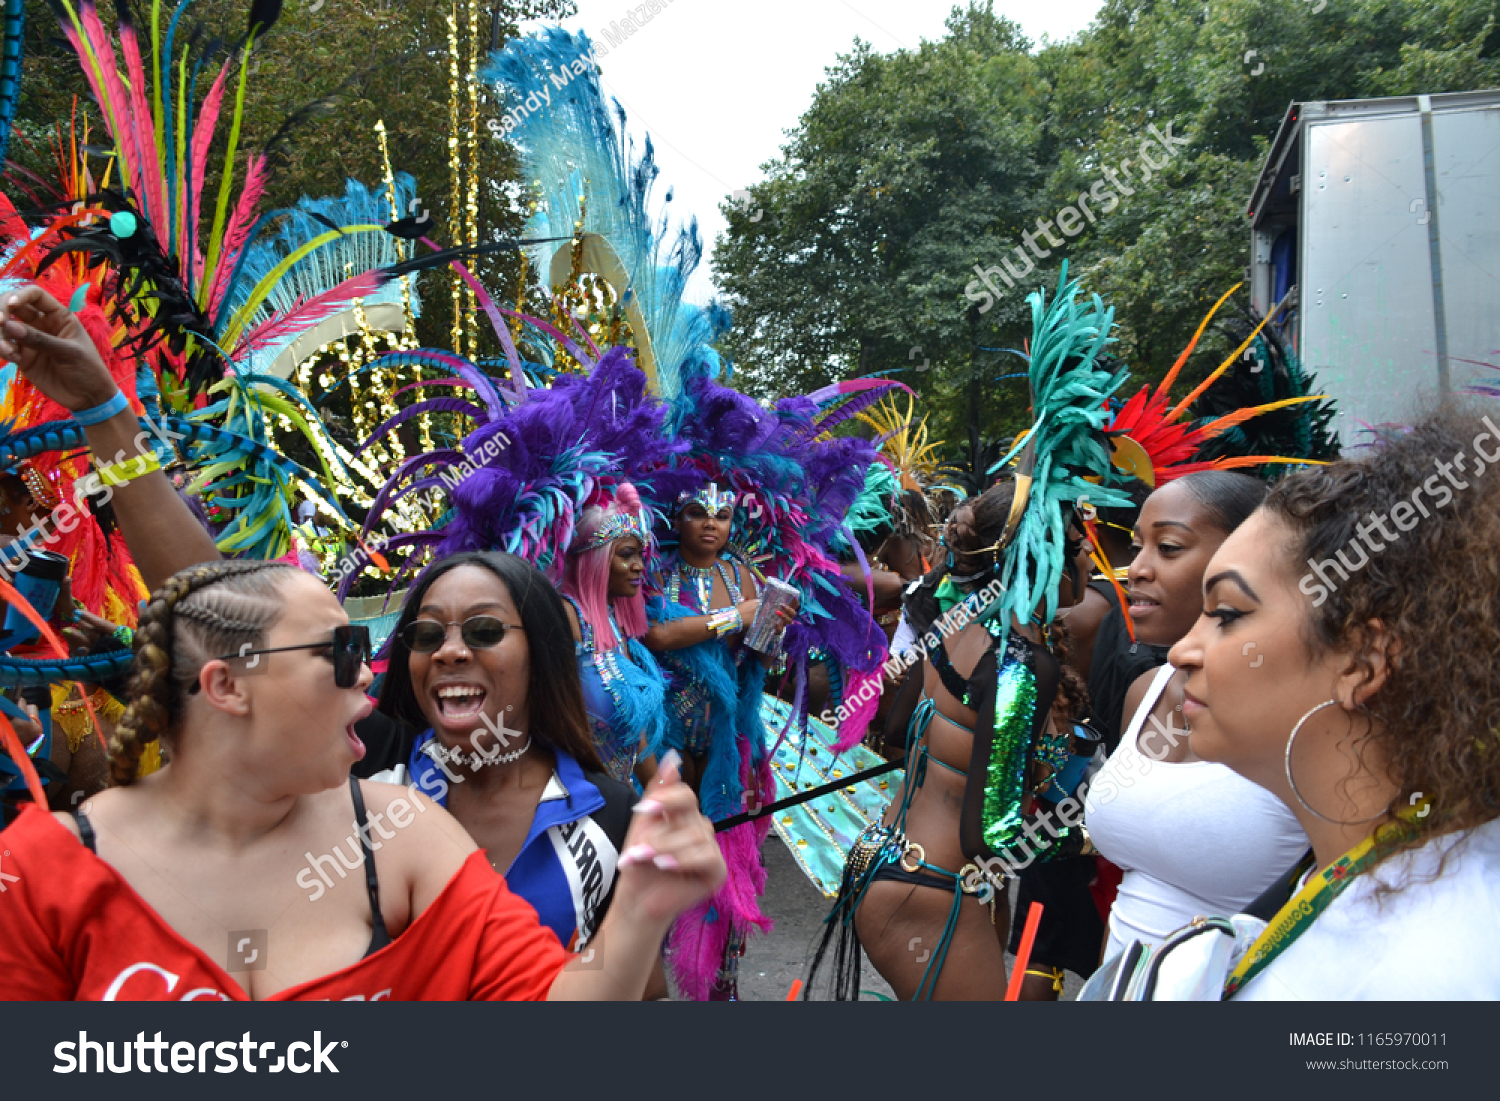 "London, England / UK - August 27th 2018: Notting Hill Carnival 2018 parade" #1165970011